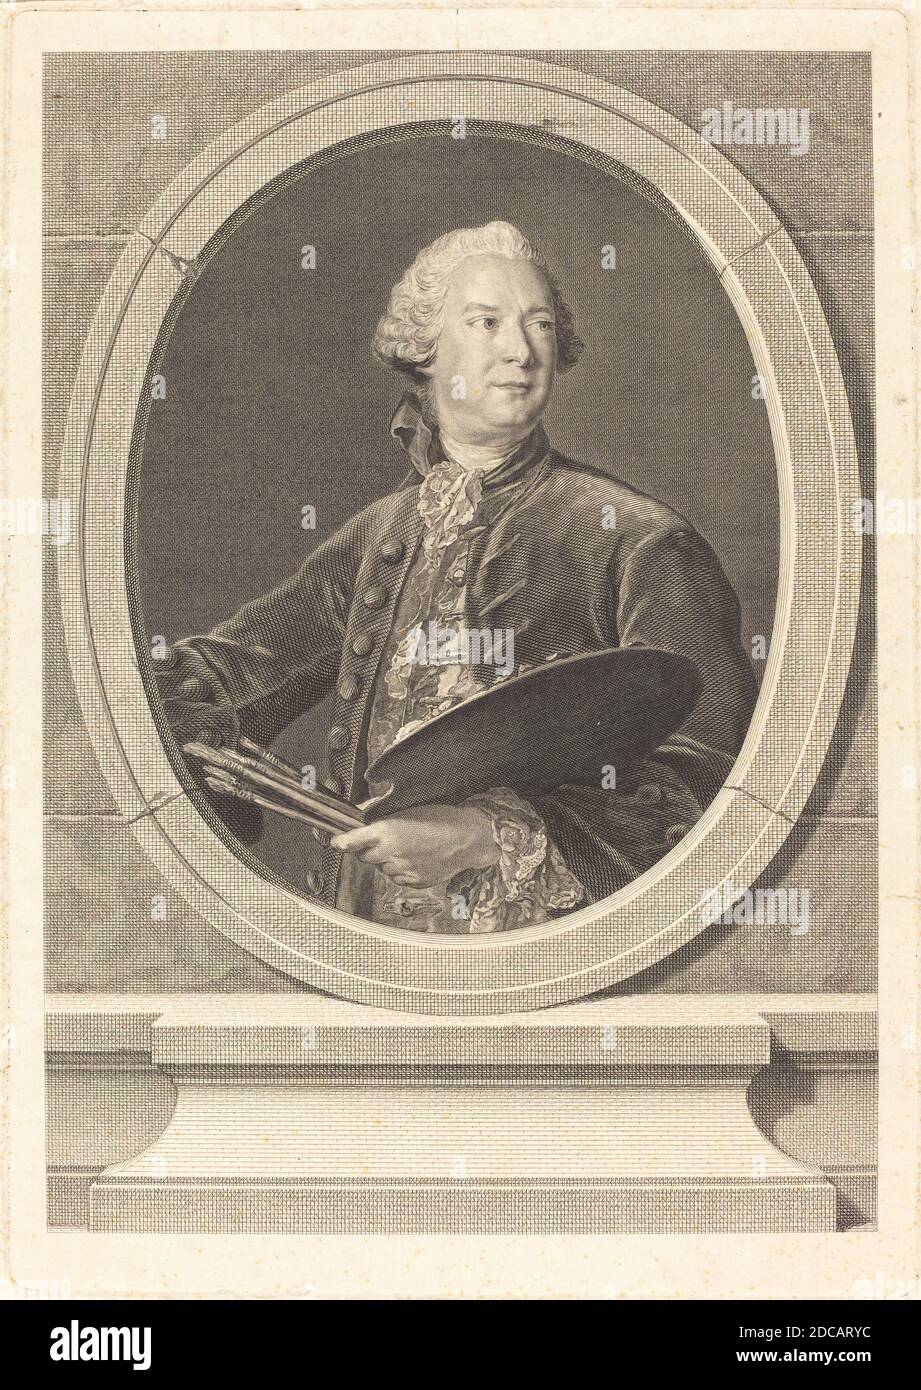 Louis-Jacques Cathelin, (artist), French, 1738/1739 - 1804, Jean-Marc Nattier, (artist after), French, 1685 - 1766, Louis Tocque, engraving on laid paper, plate: 37.3 x 26.4 cm (14 11/16 x 10 3/8 in.), sheet: 39.4 x 28.2 cm (15 1/2 x 11 1/8 in Stock Photo